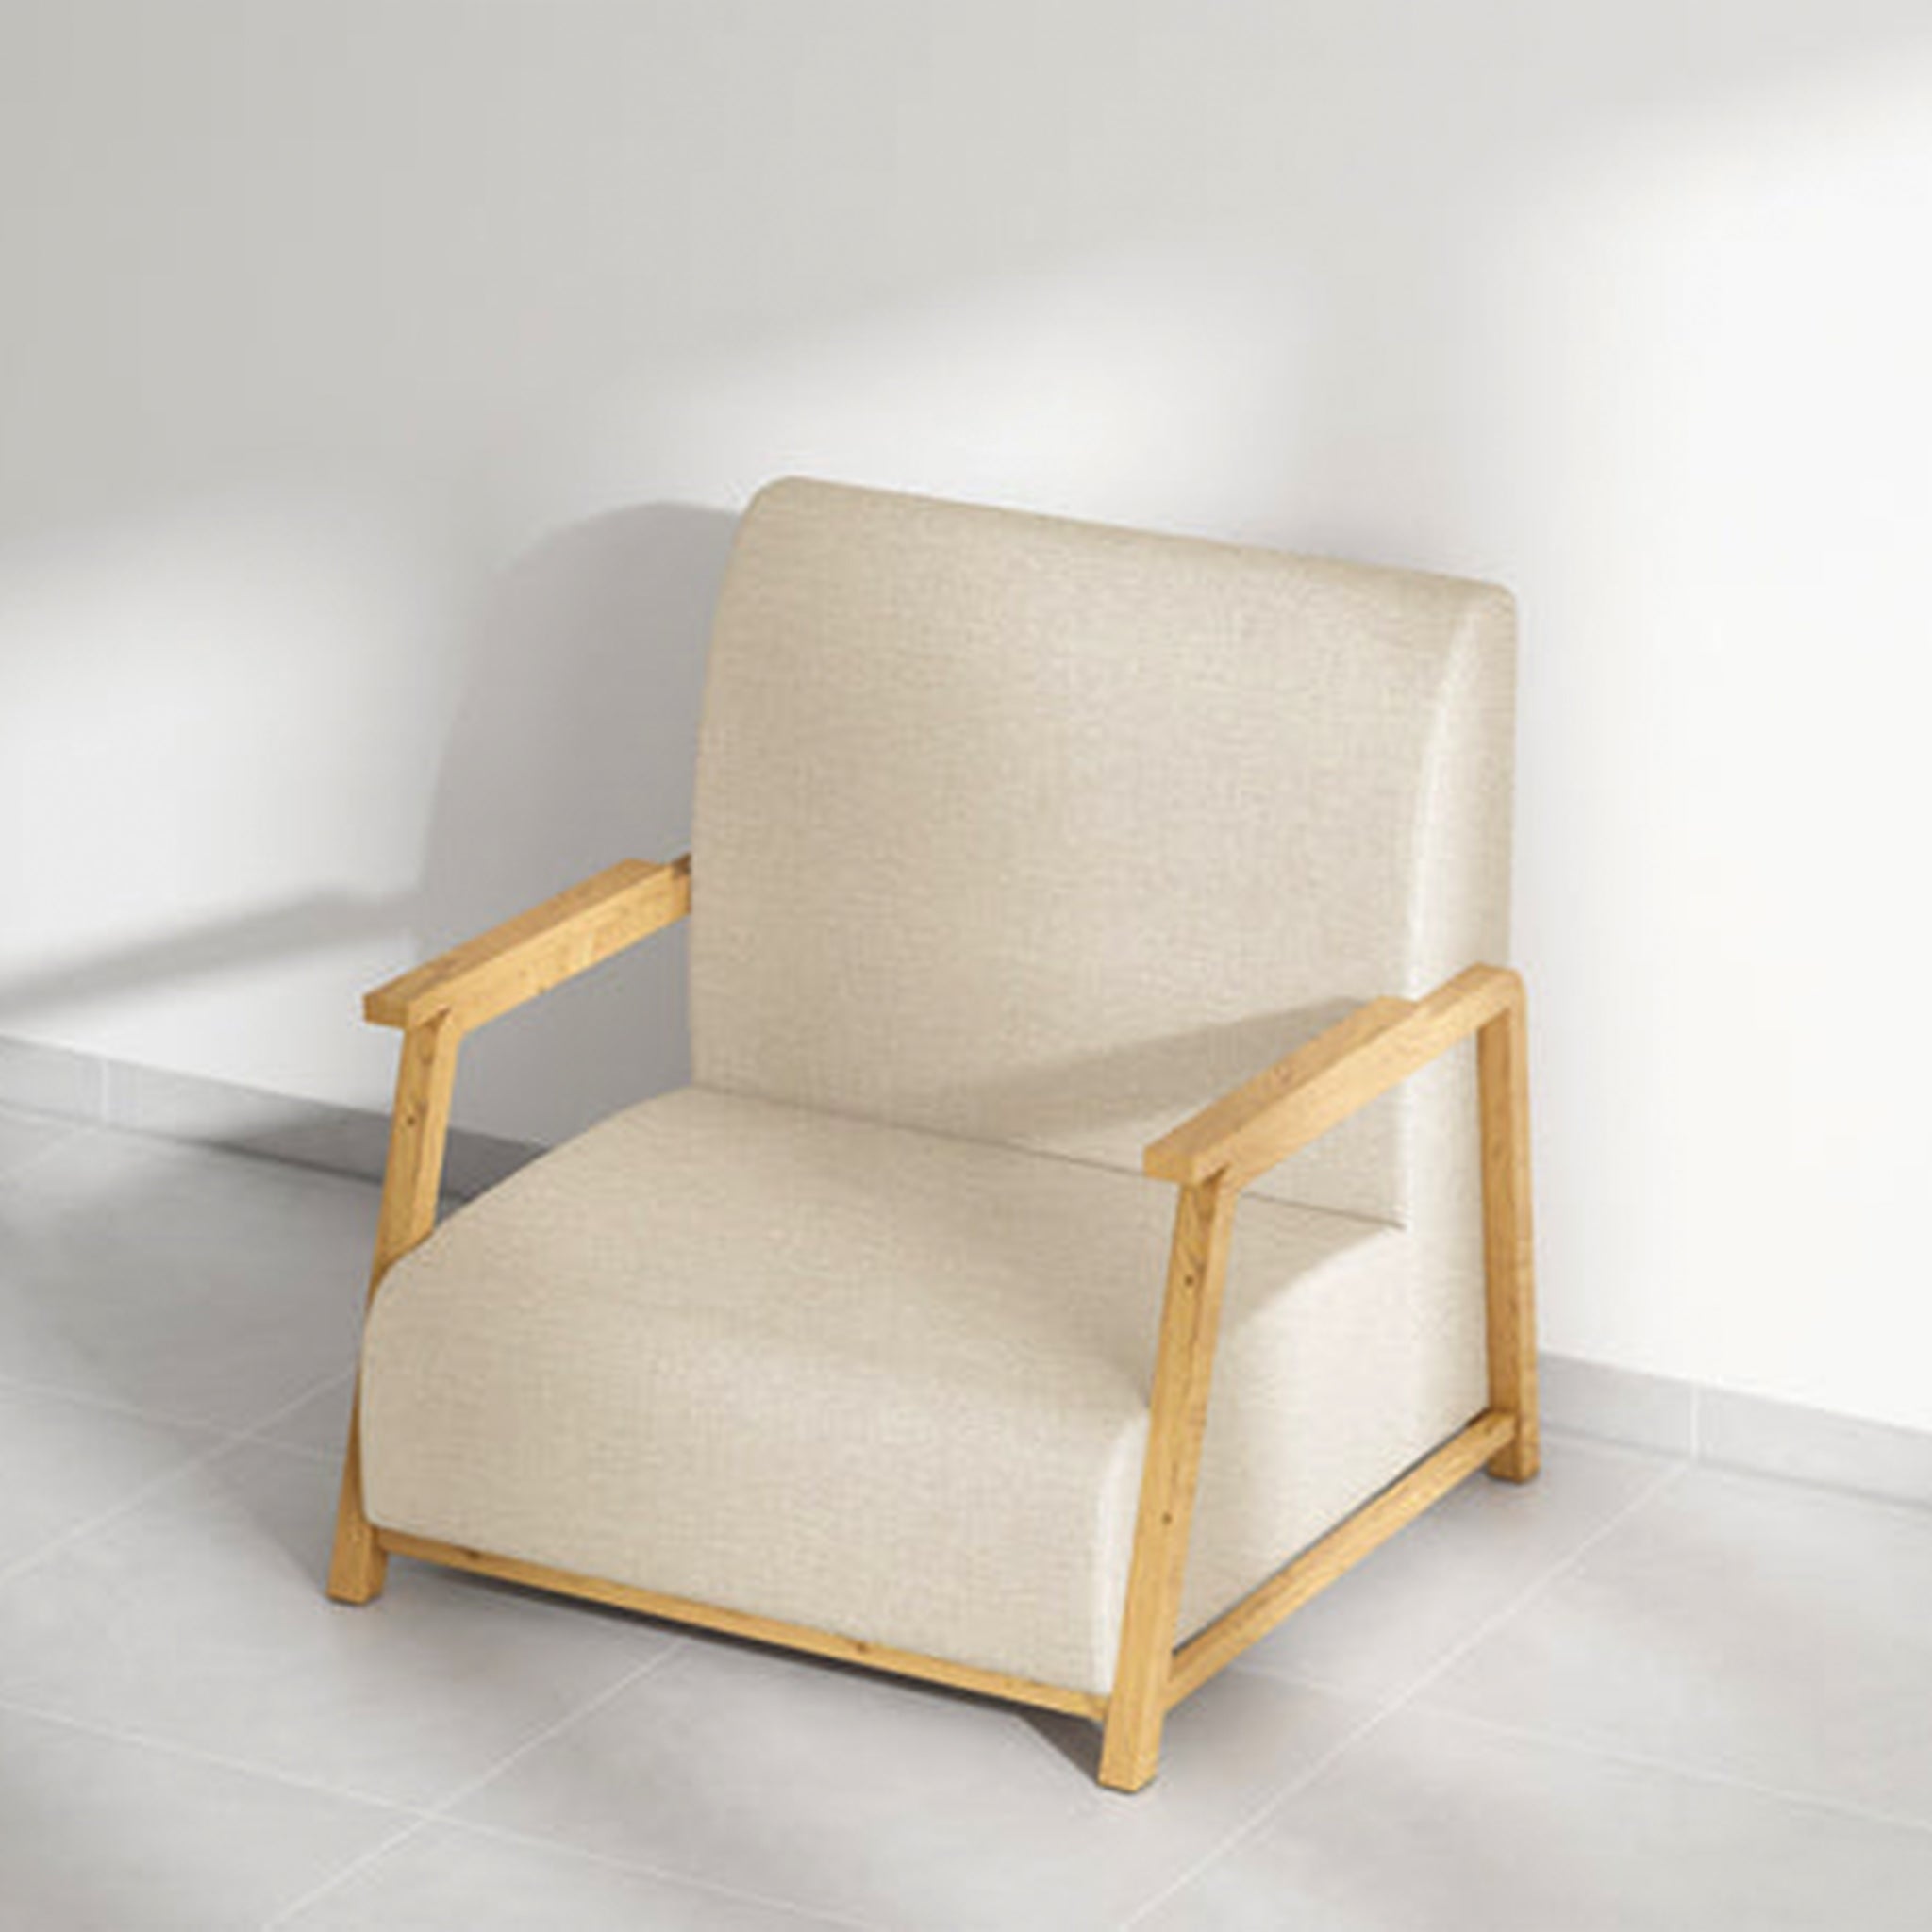 Natural wood and light fabric Dixon Arm Accent Chair.